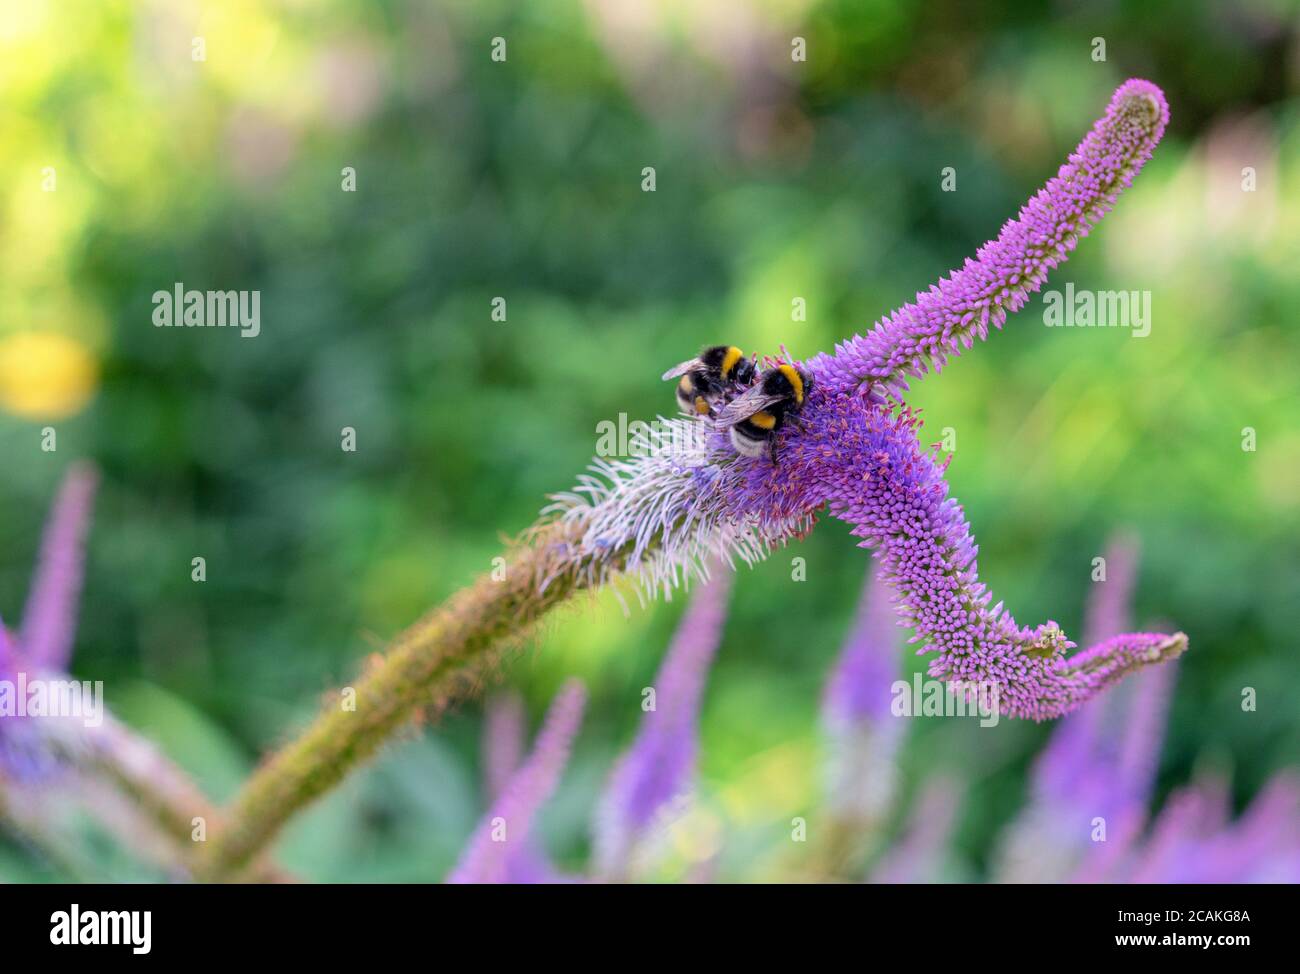 Two bees collecting pollen on a purple veronicastrum vergini?um flower. Stock Photo